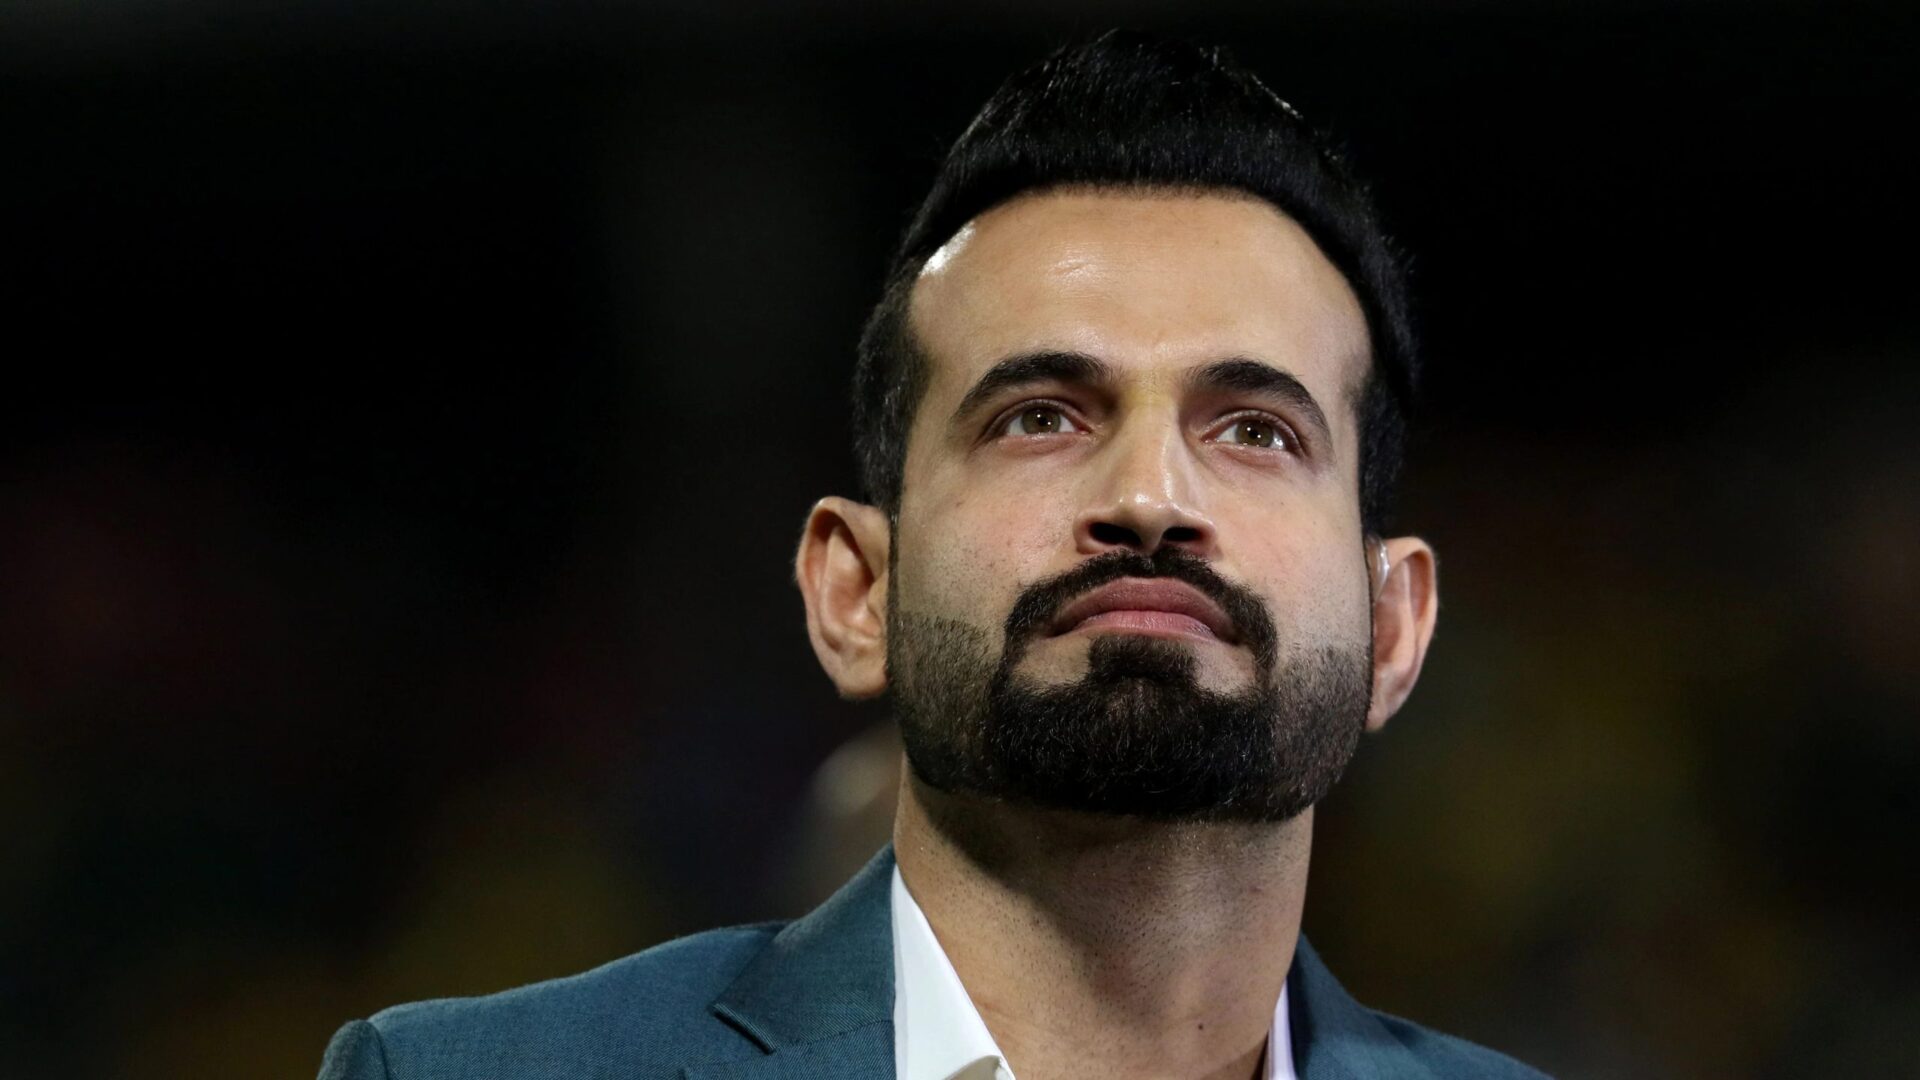 Cricketer Irfan Pathan was hit by people for grabbing a woman's hair in a bus! The case itself shared